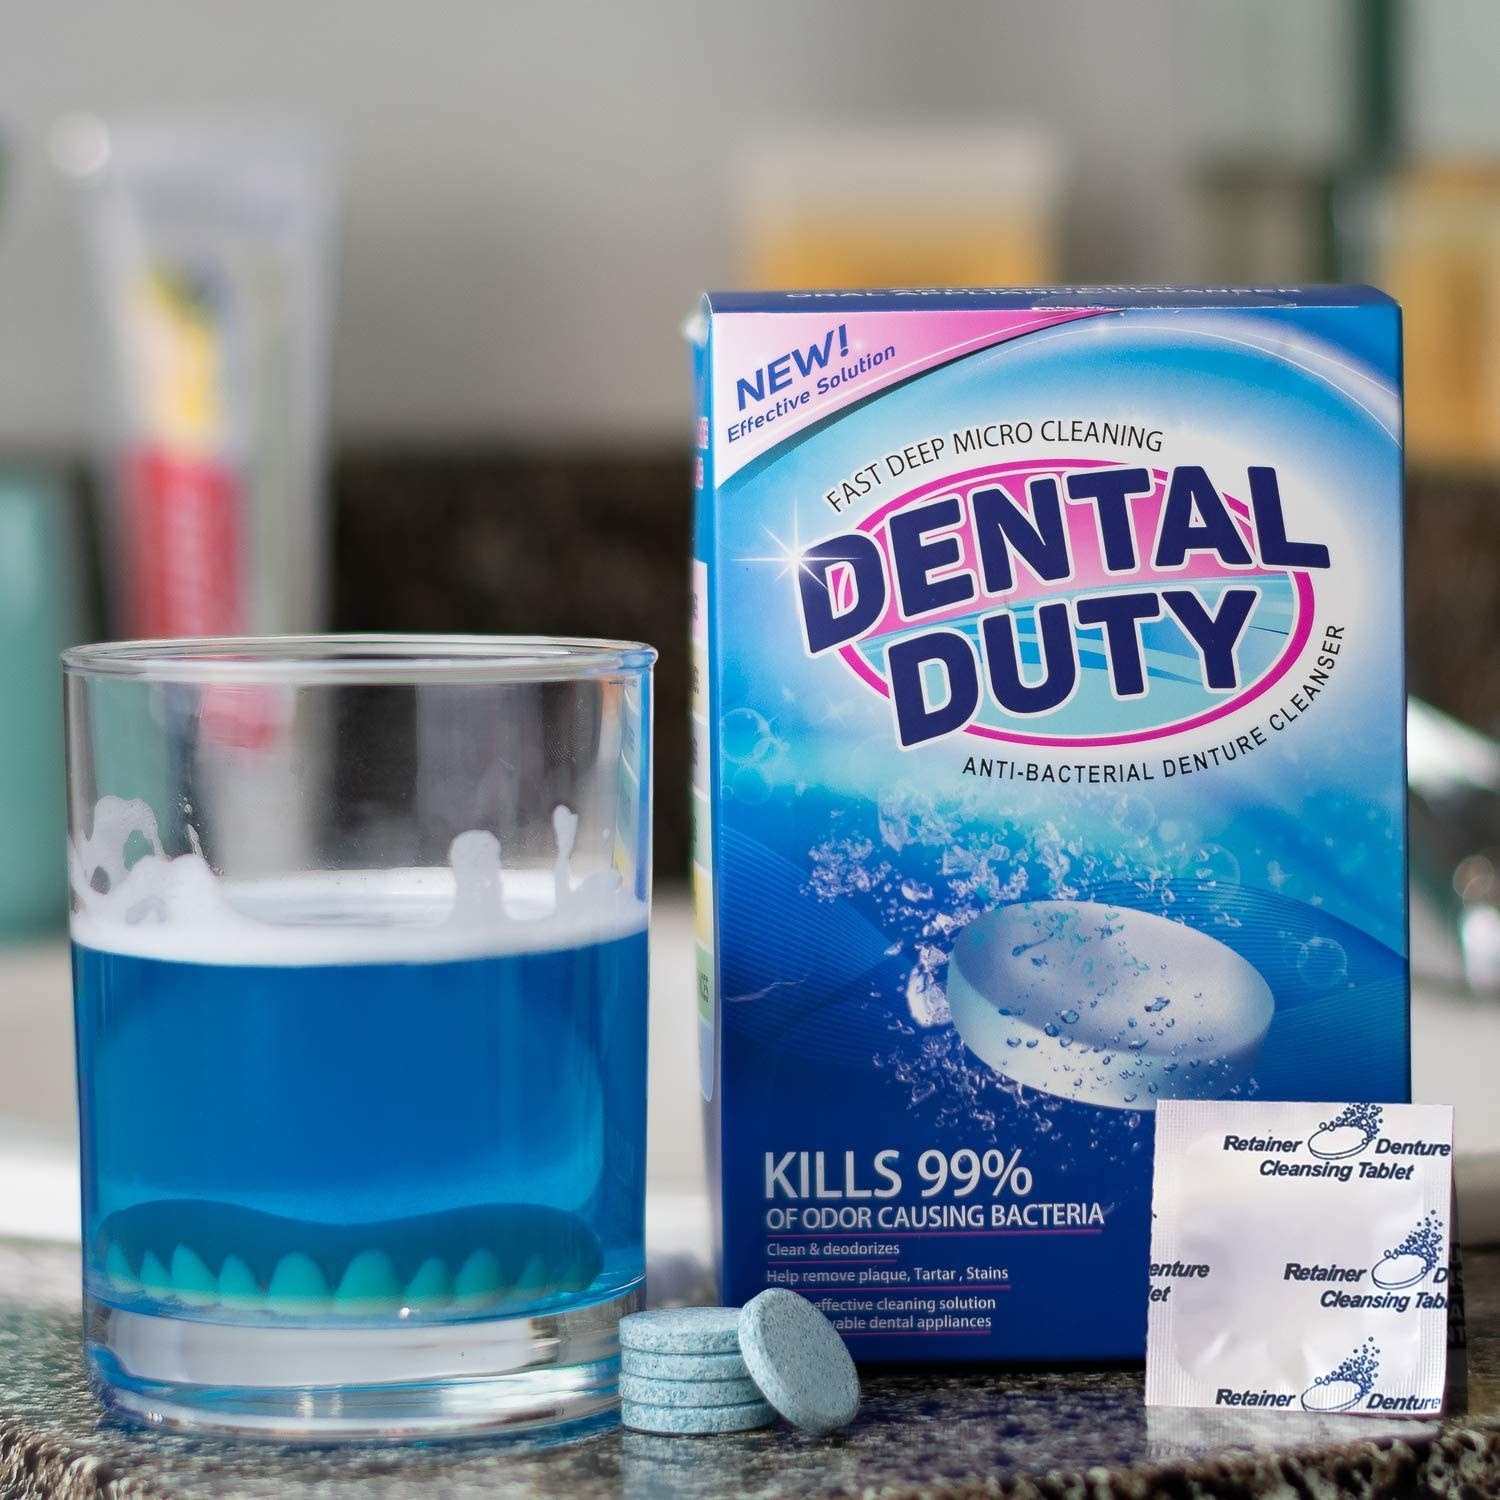 A pack of dental duty tablets next to a glass with dentures in it